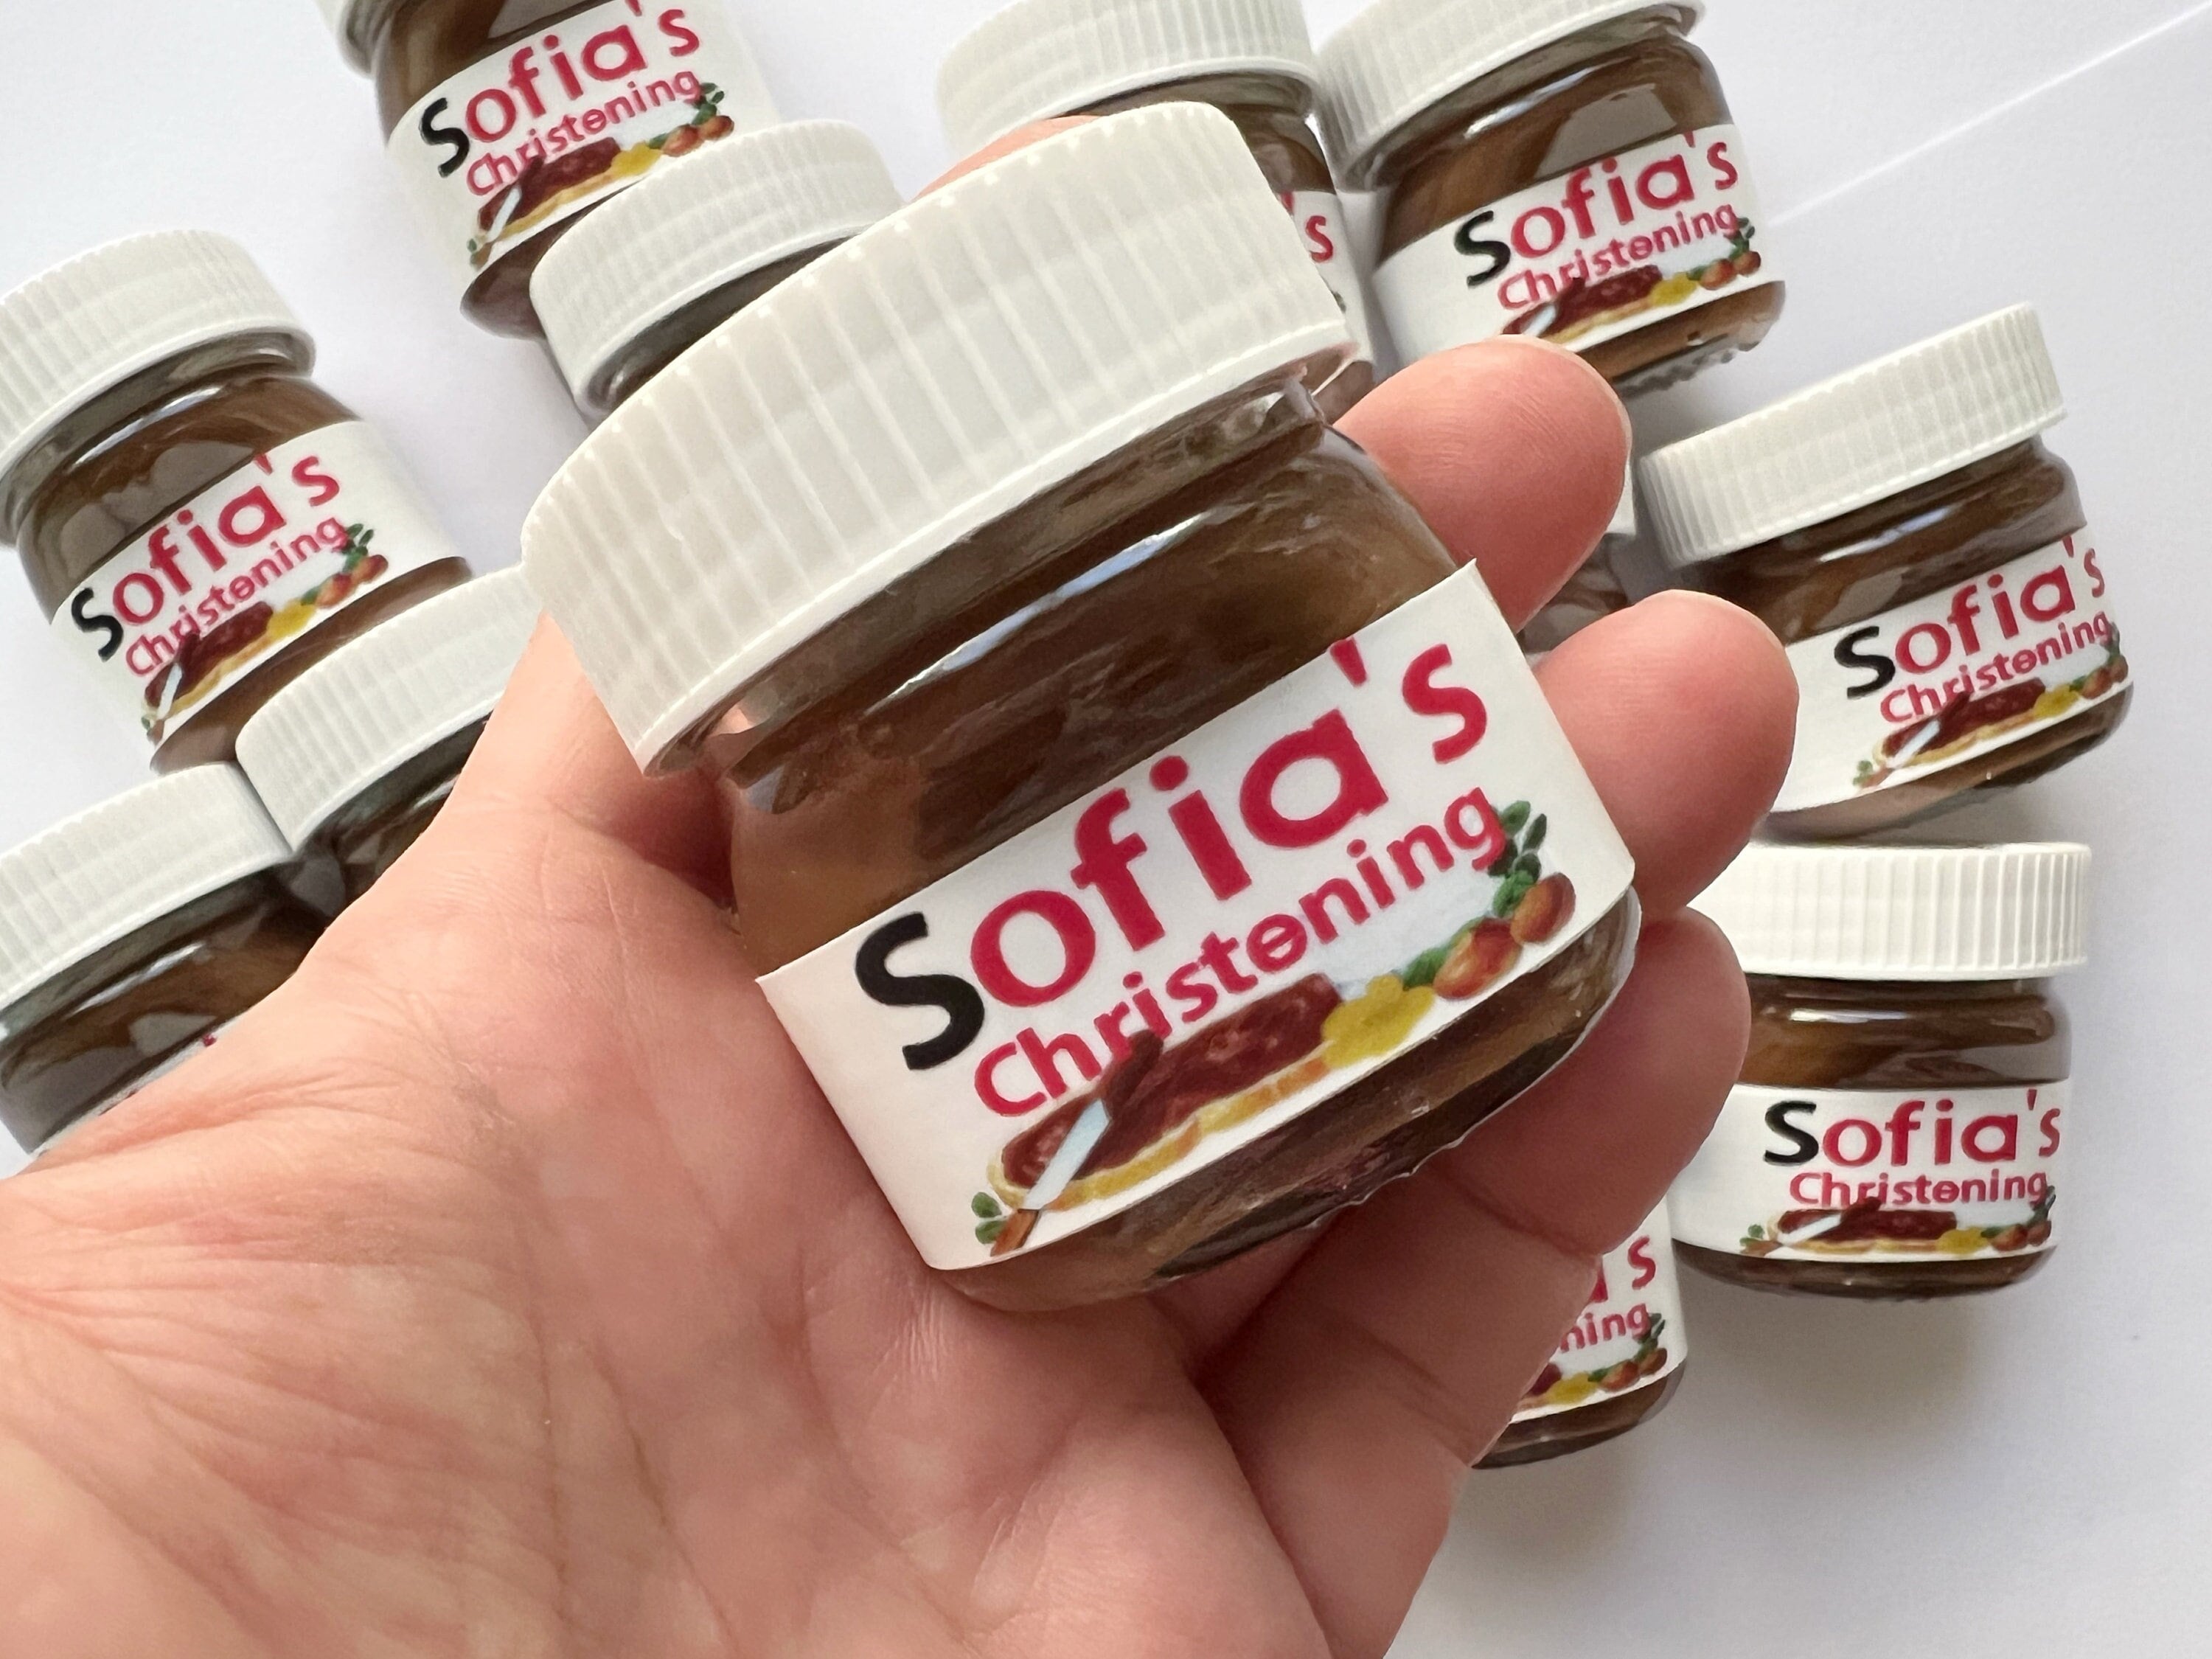 Check Out This Personalised Nutella Spoon! - Shopping : Bump, Baby and You,  Pregnancy, Parenting and Baby Advice and Info